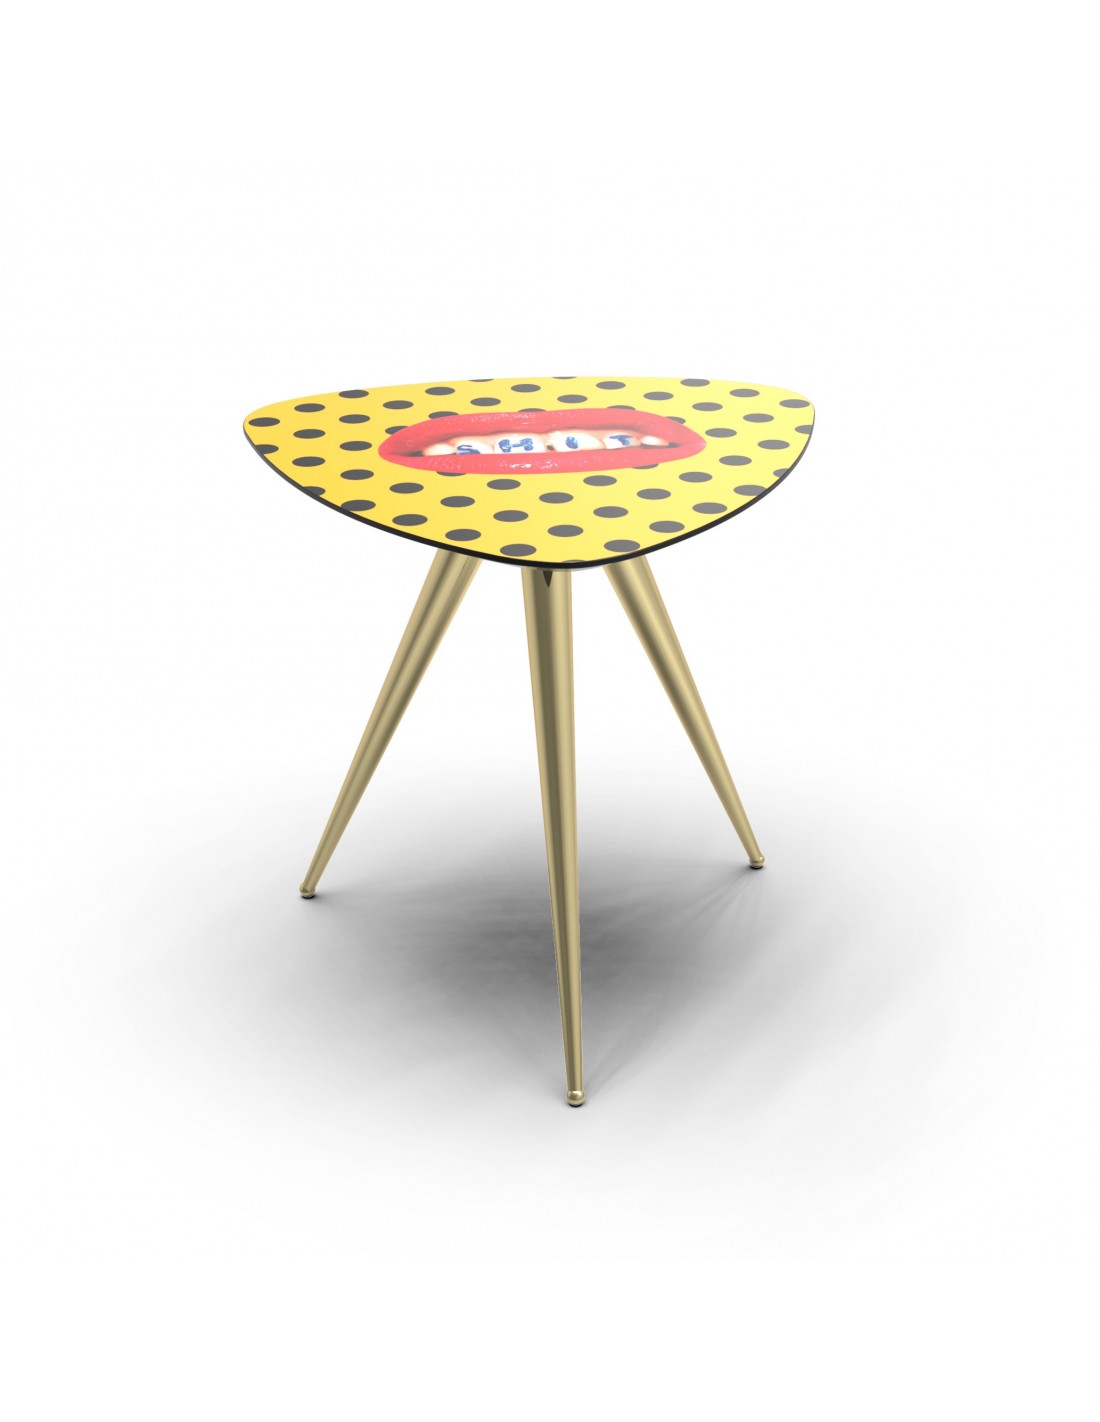 Buy SELETTI Toiletpaper Side table - Shit online? Fast and safe 